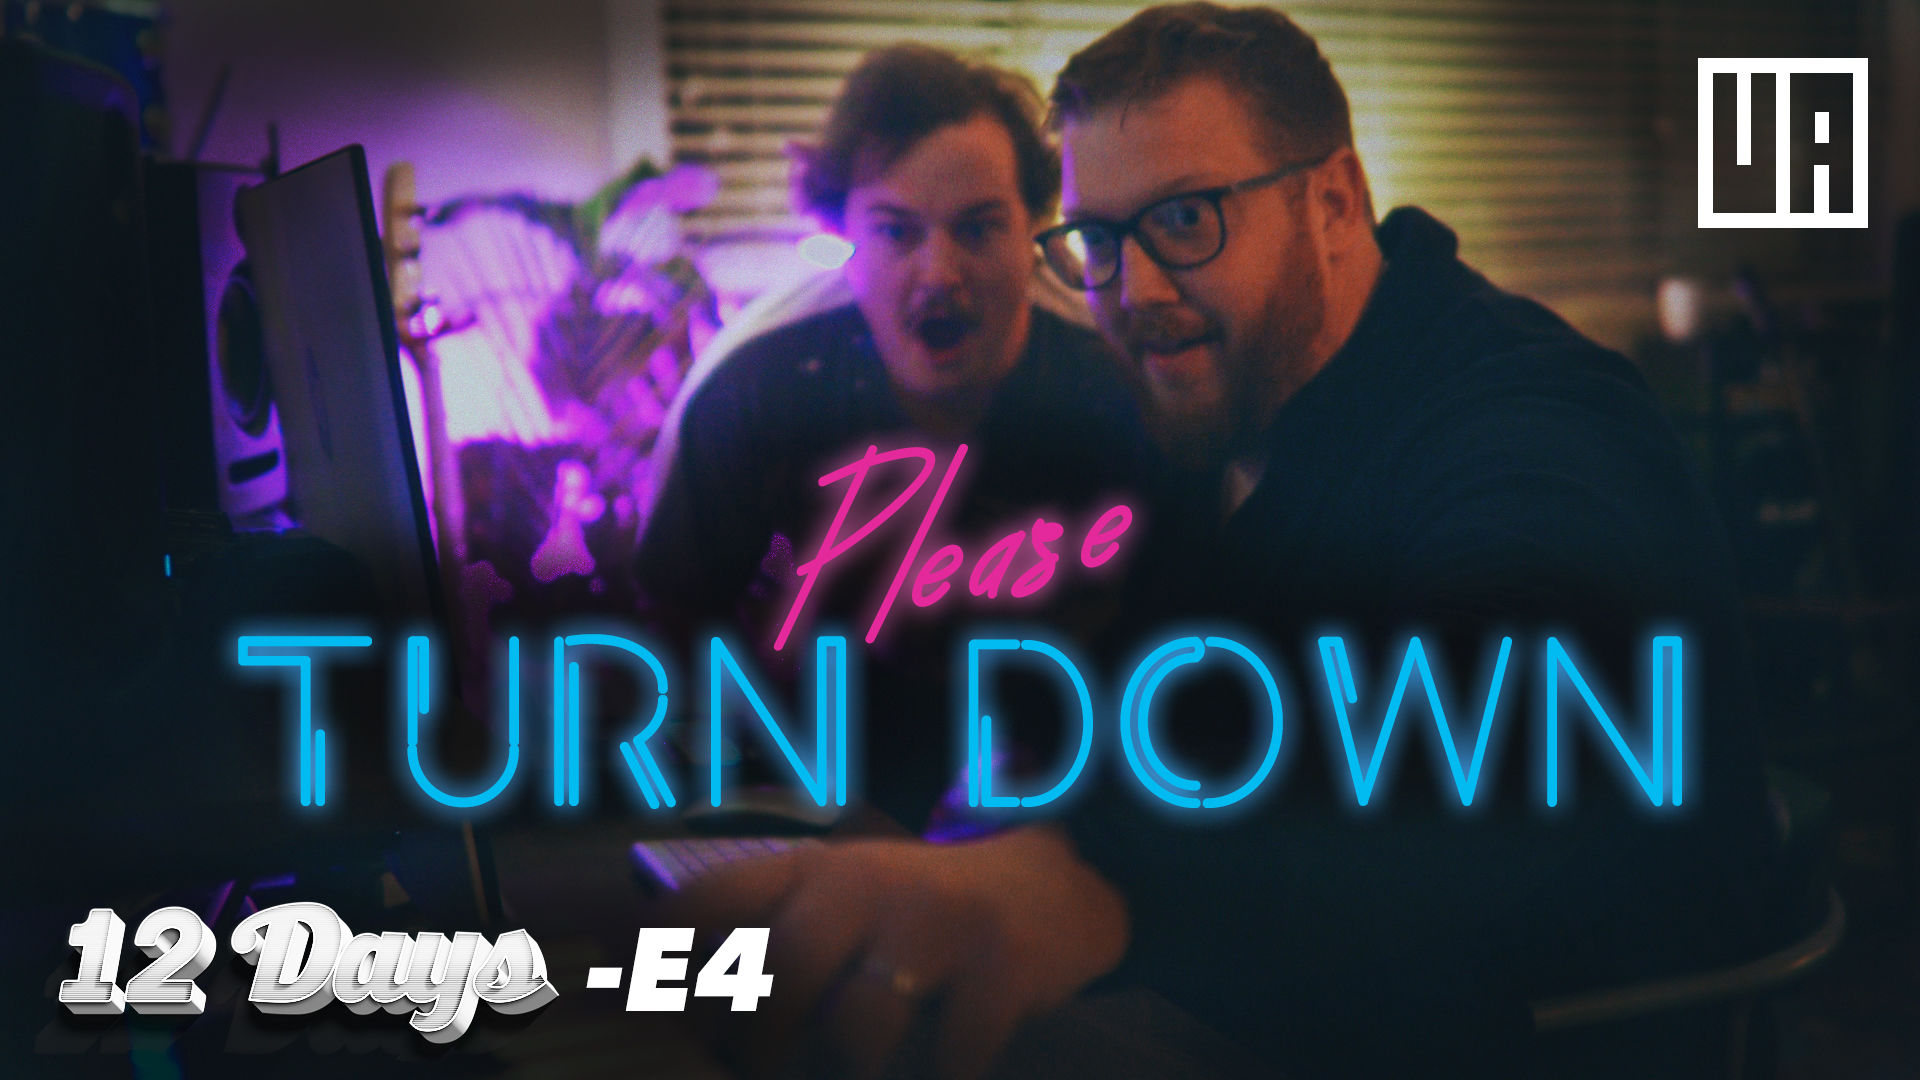 E4 - Please Turn Down - "Dude, Check Out This Beat"